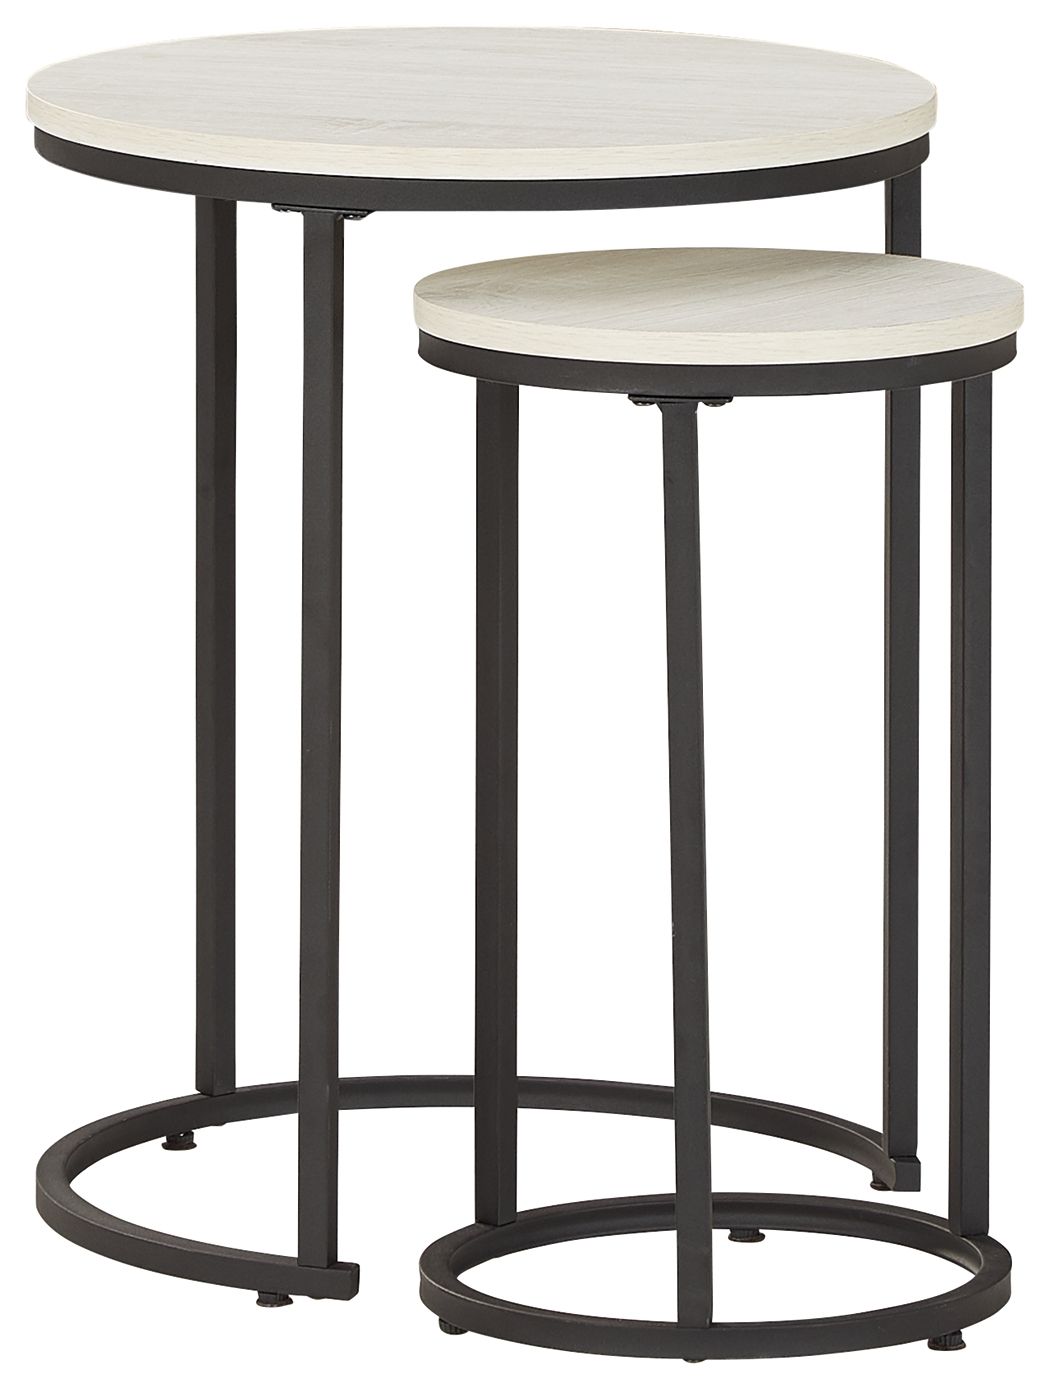 Briarsboro - Accent Table (Set of 2)